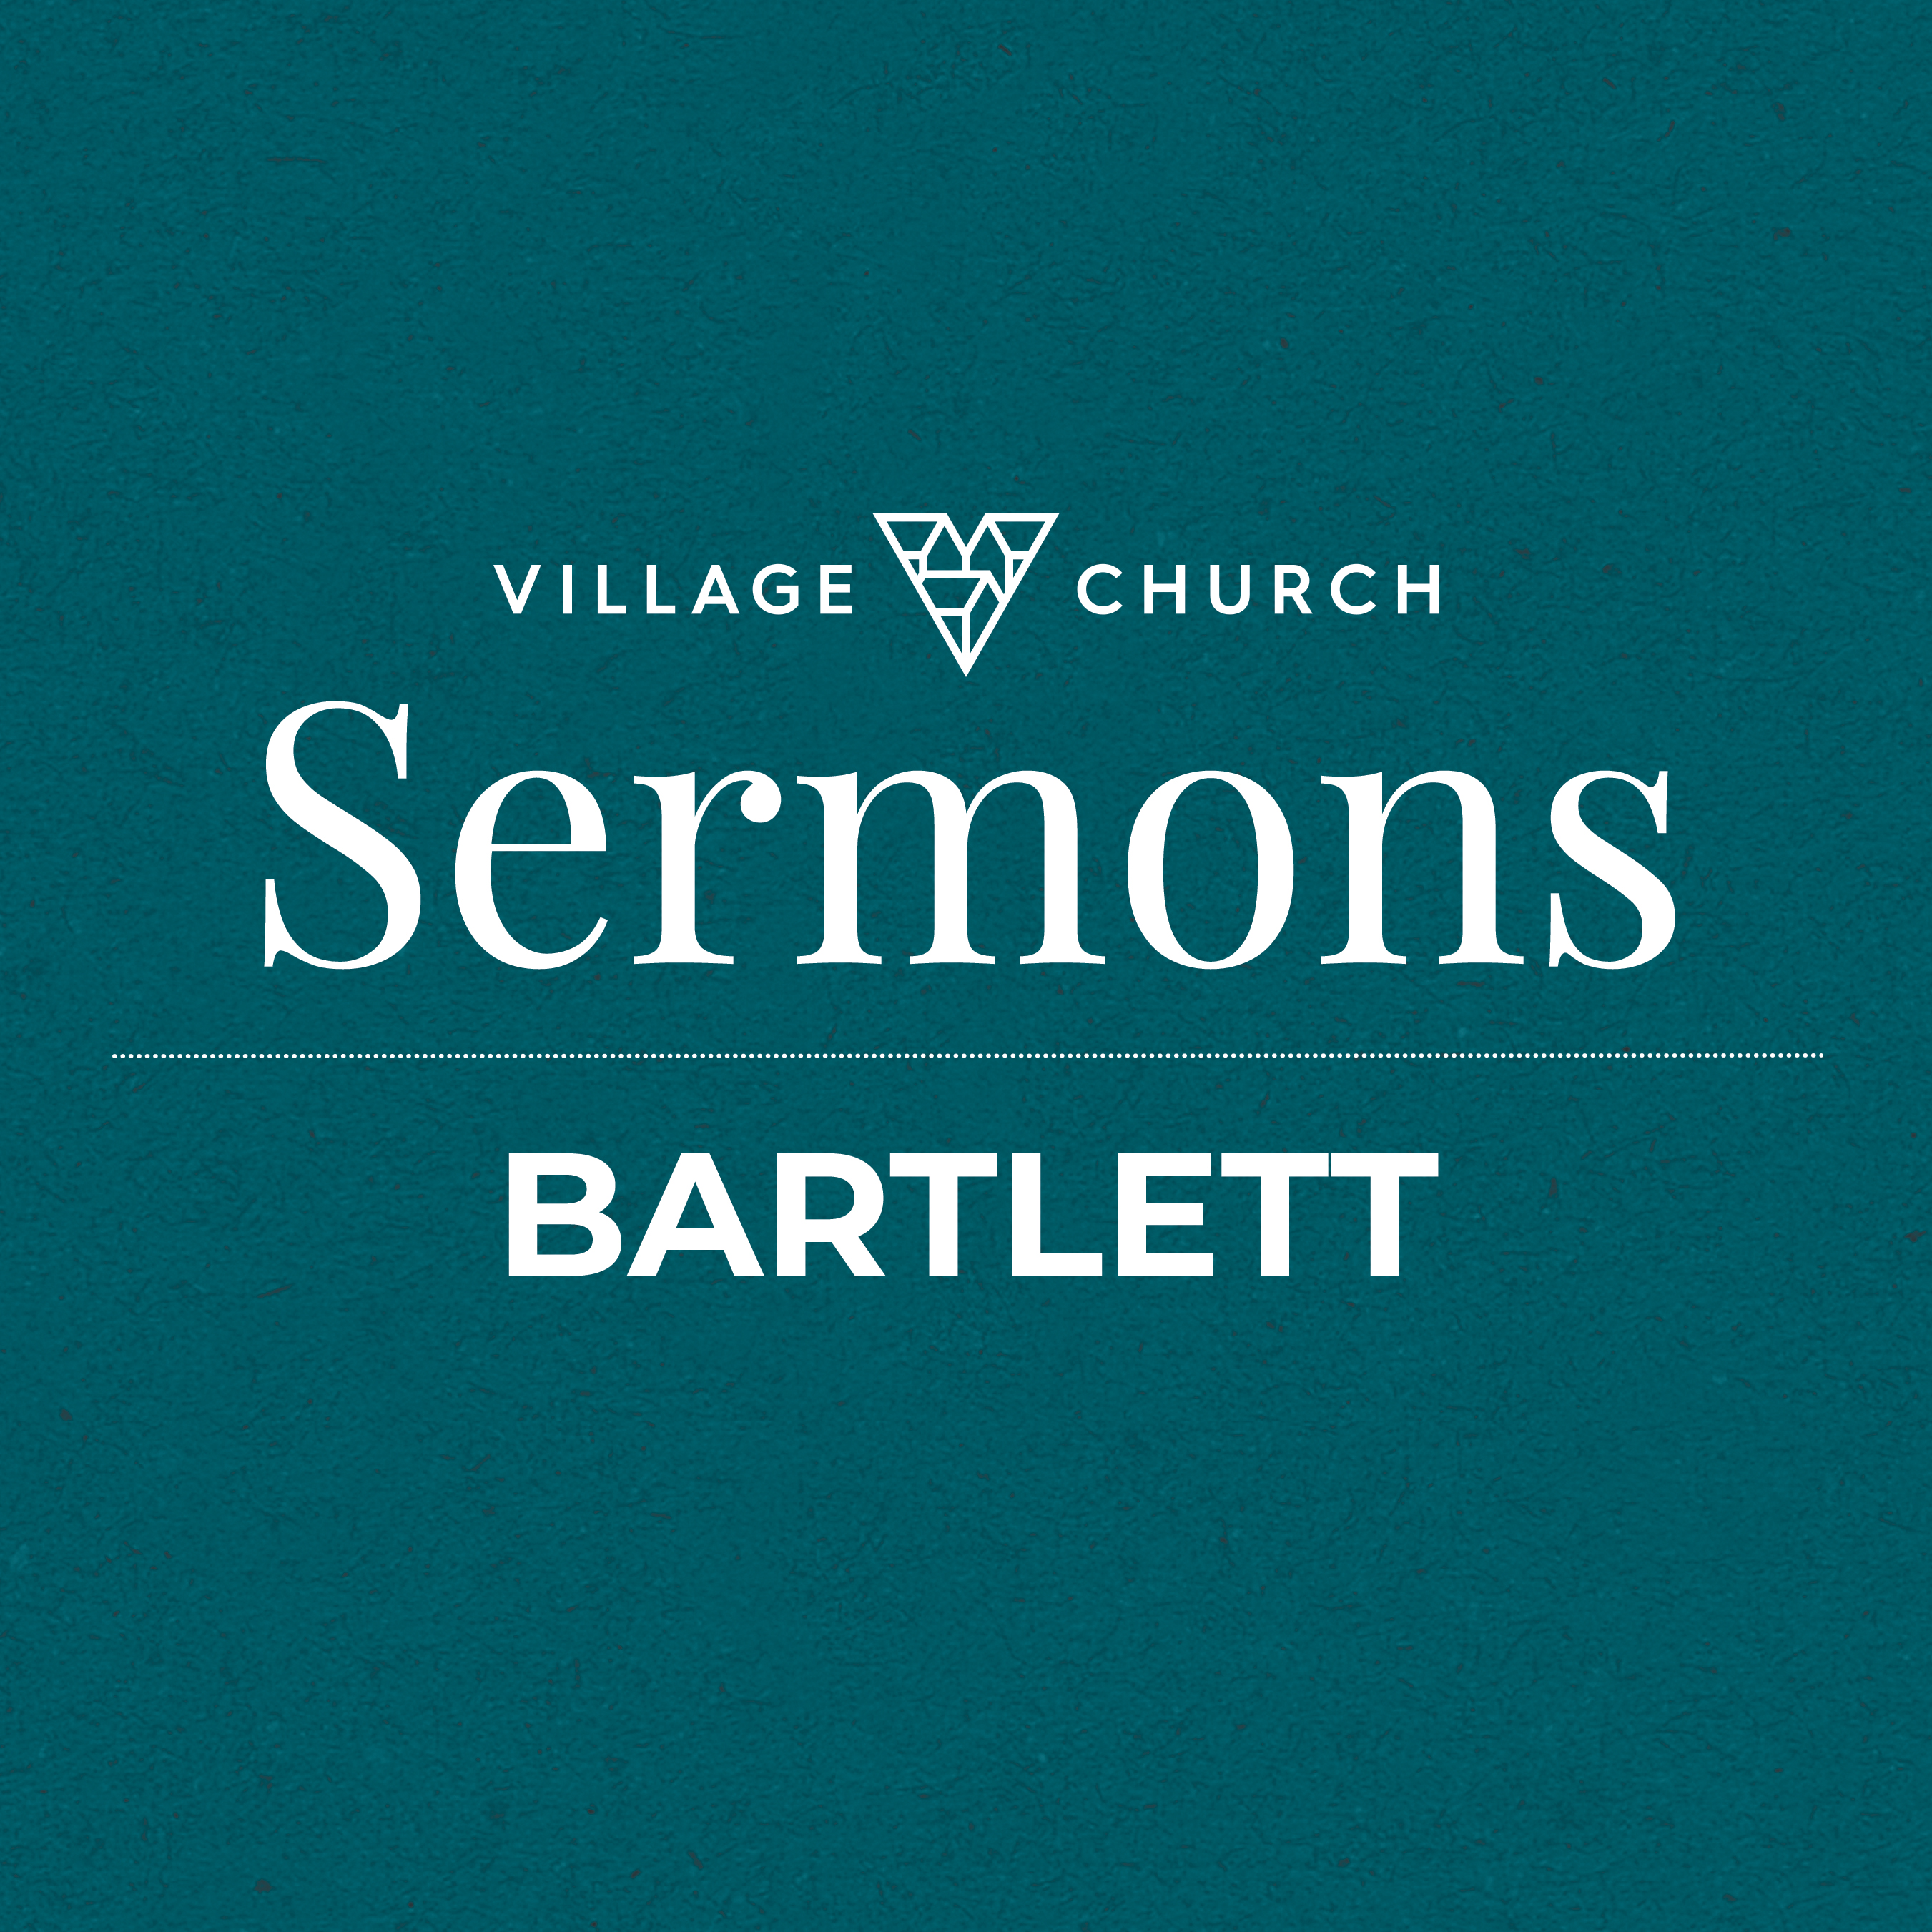 Sermon Q&A: Why Does Scripture Tell Us To Stand Against Satan but Not Fight Him?